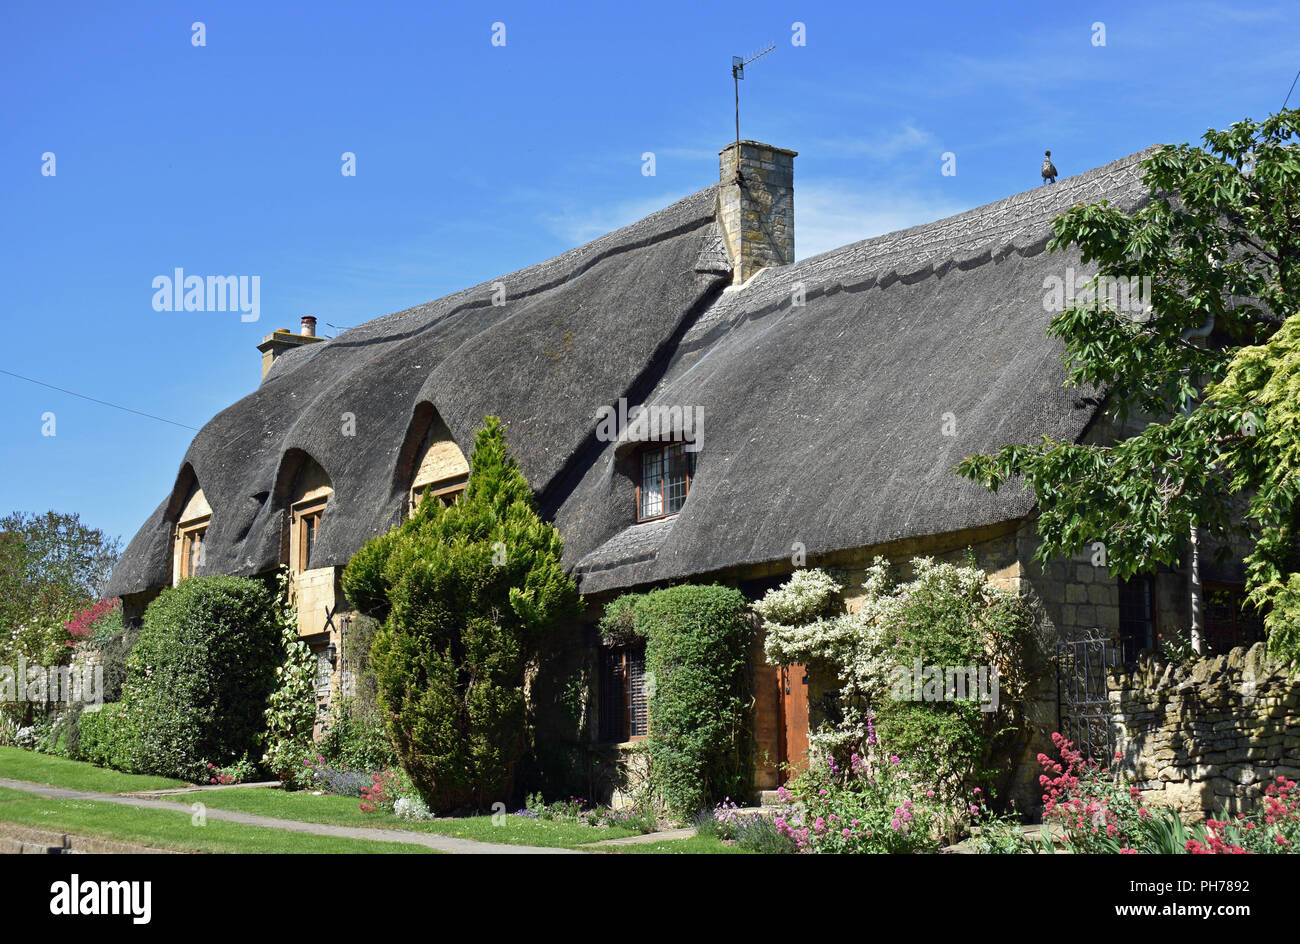 Thatched Cottage Chipping Campden Gloucestershire Cotswolds